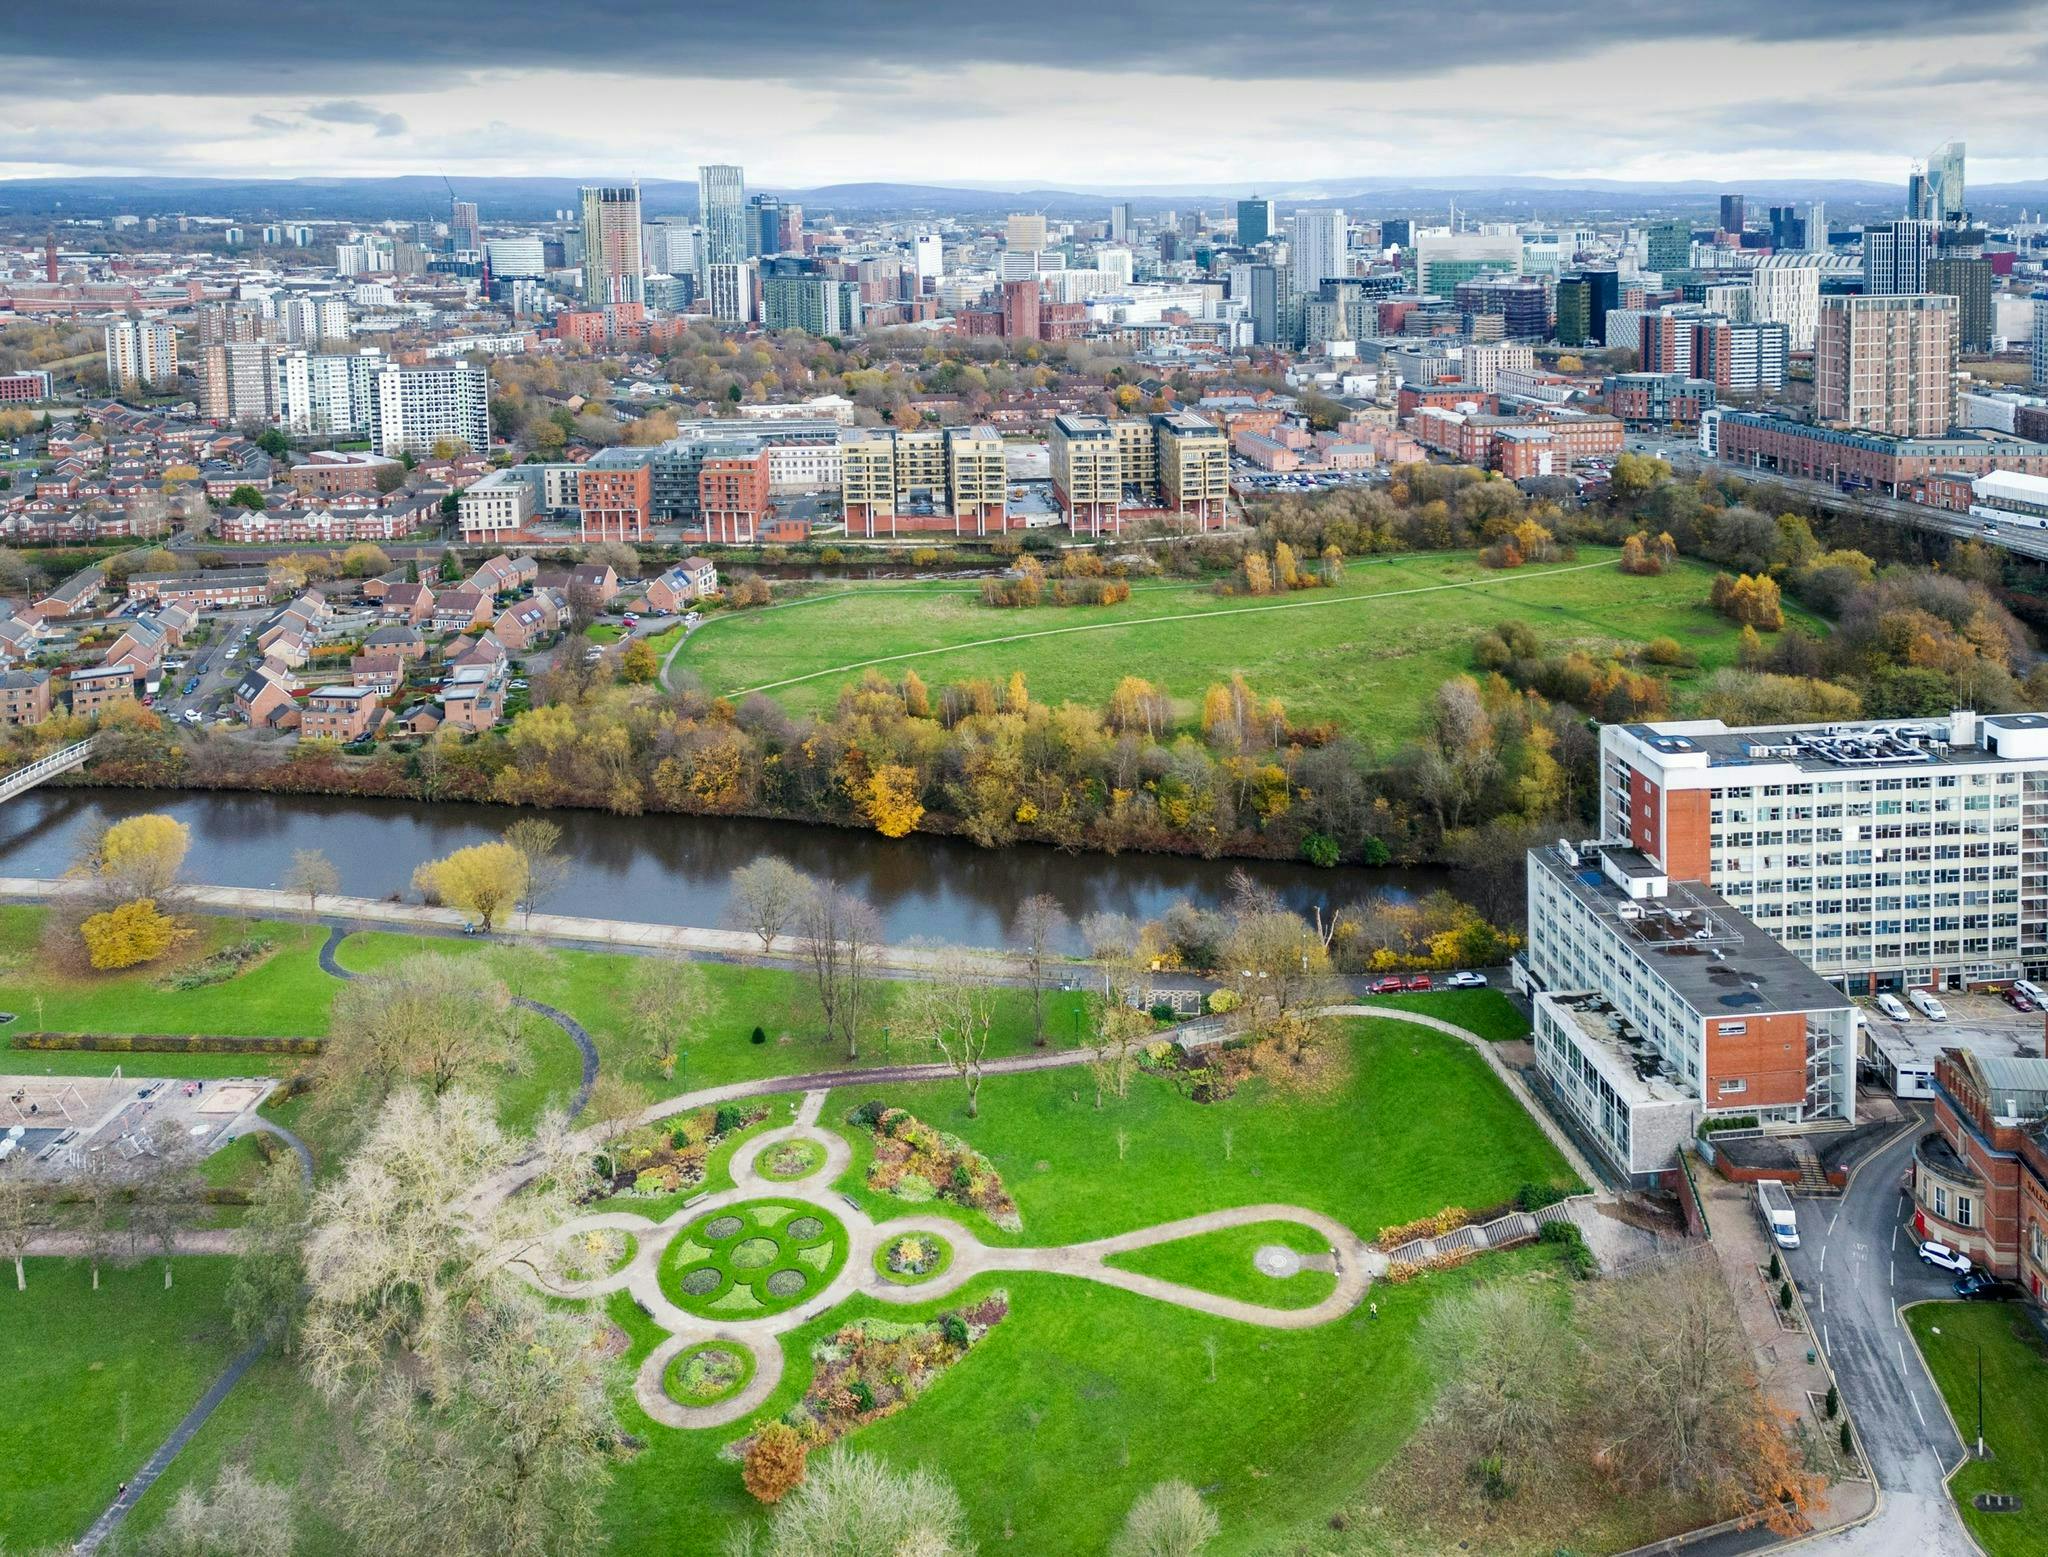 Aerial image of Salford with a green park in the foreground and buildings in the background.